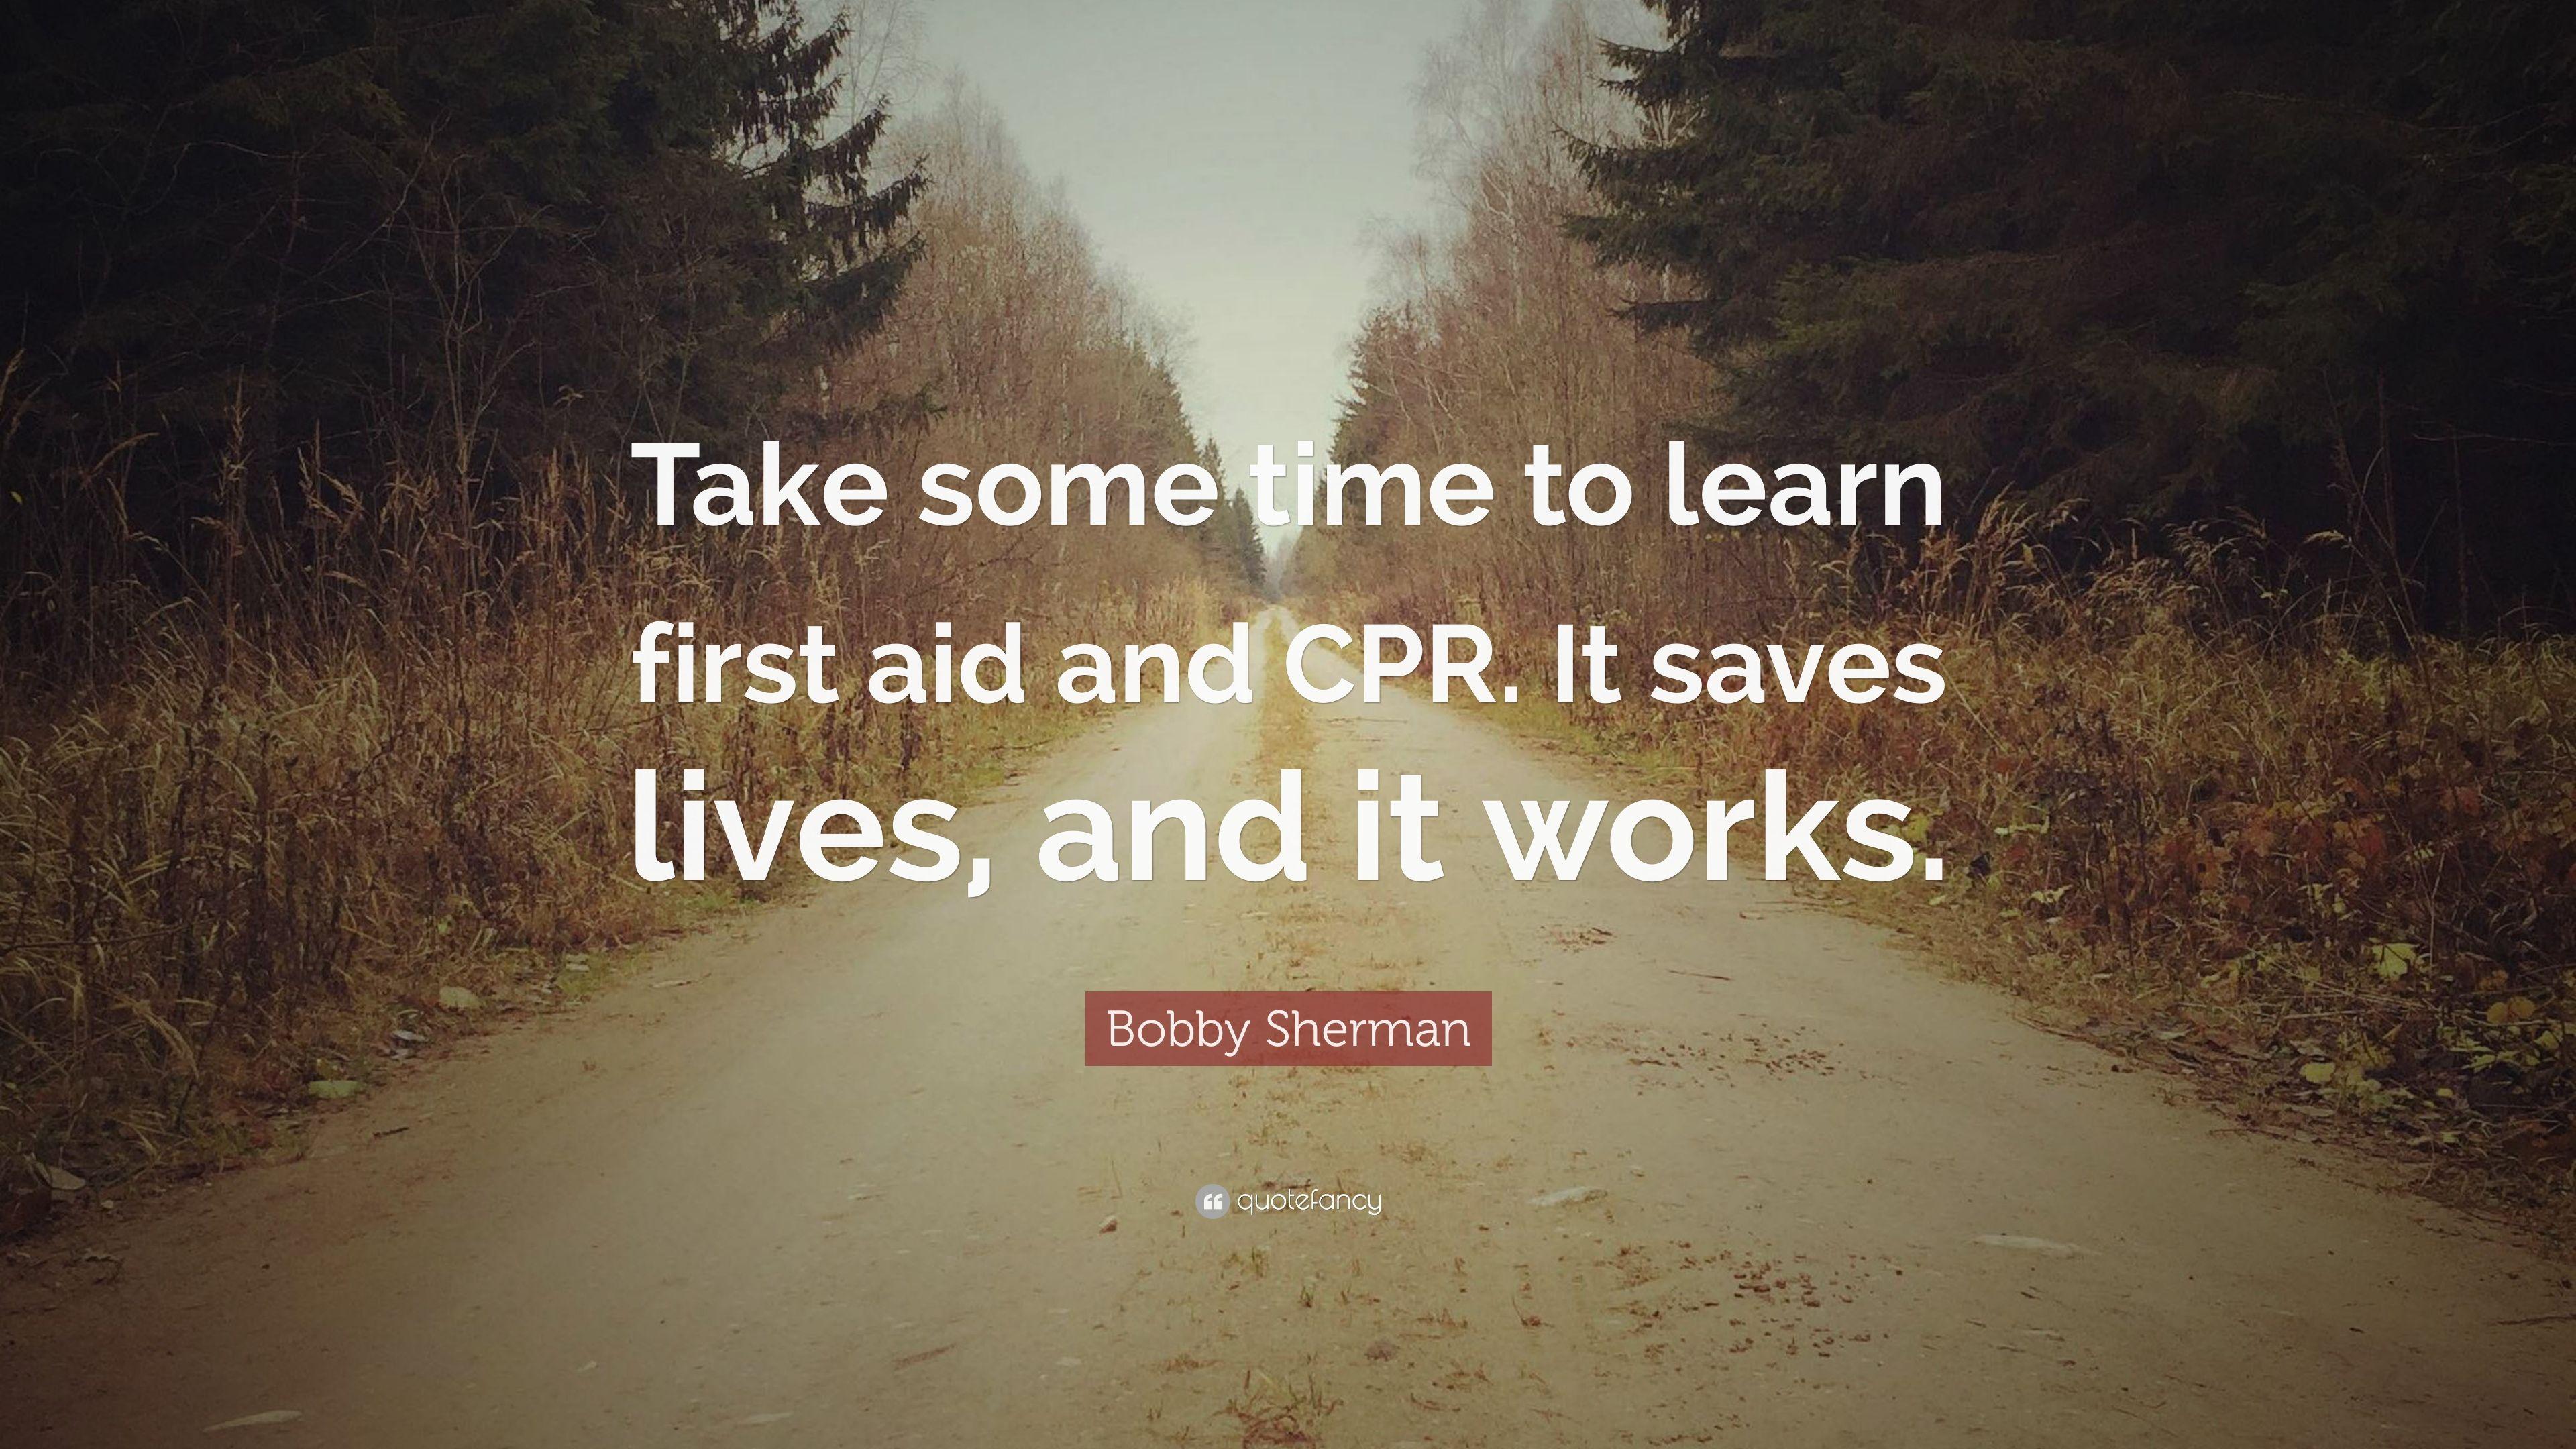 Bobby Sherman Quote: “Take some time to learn first aid and CPR. It